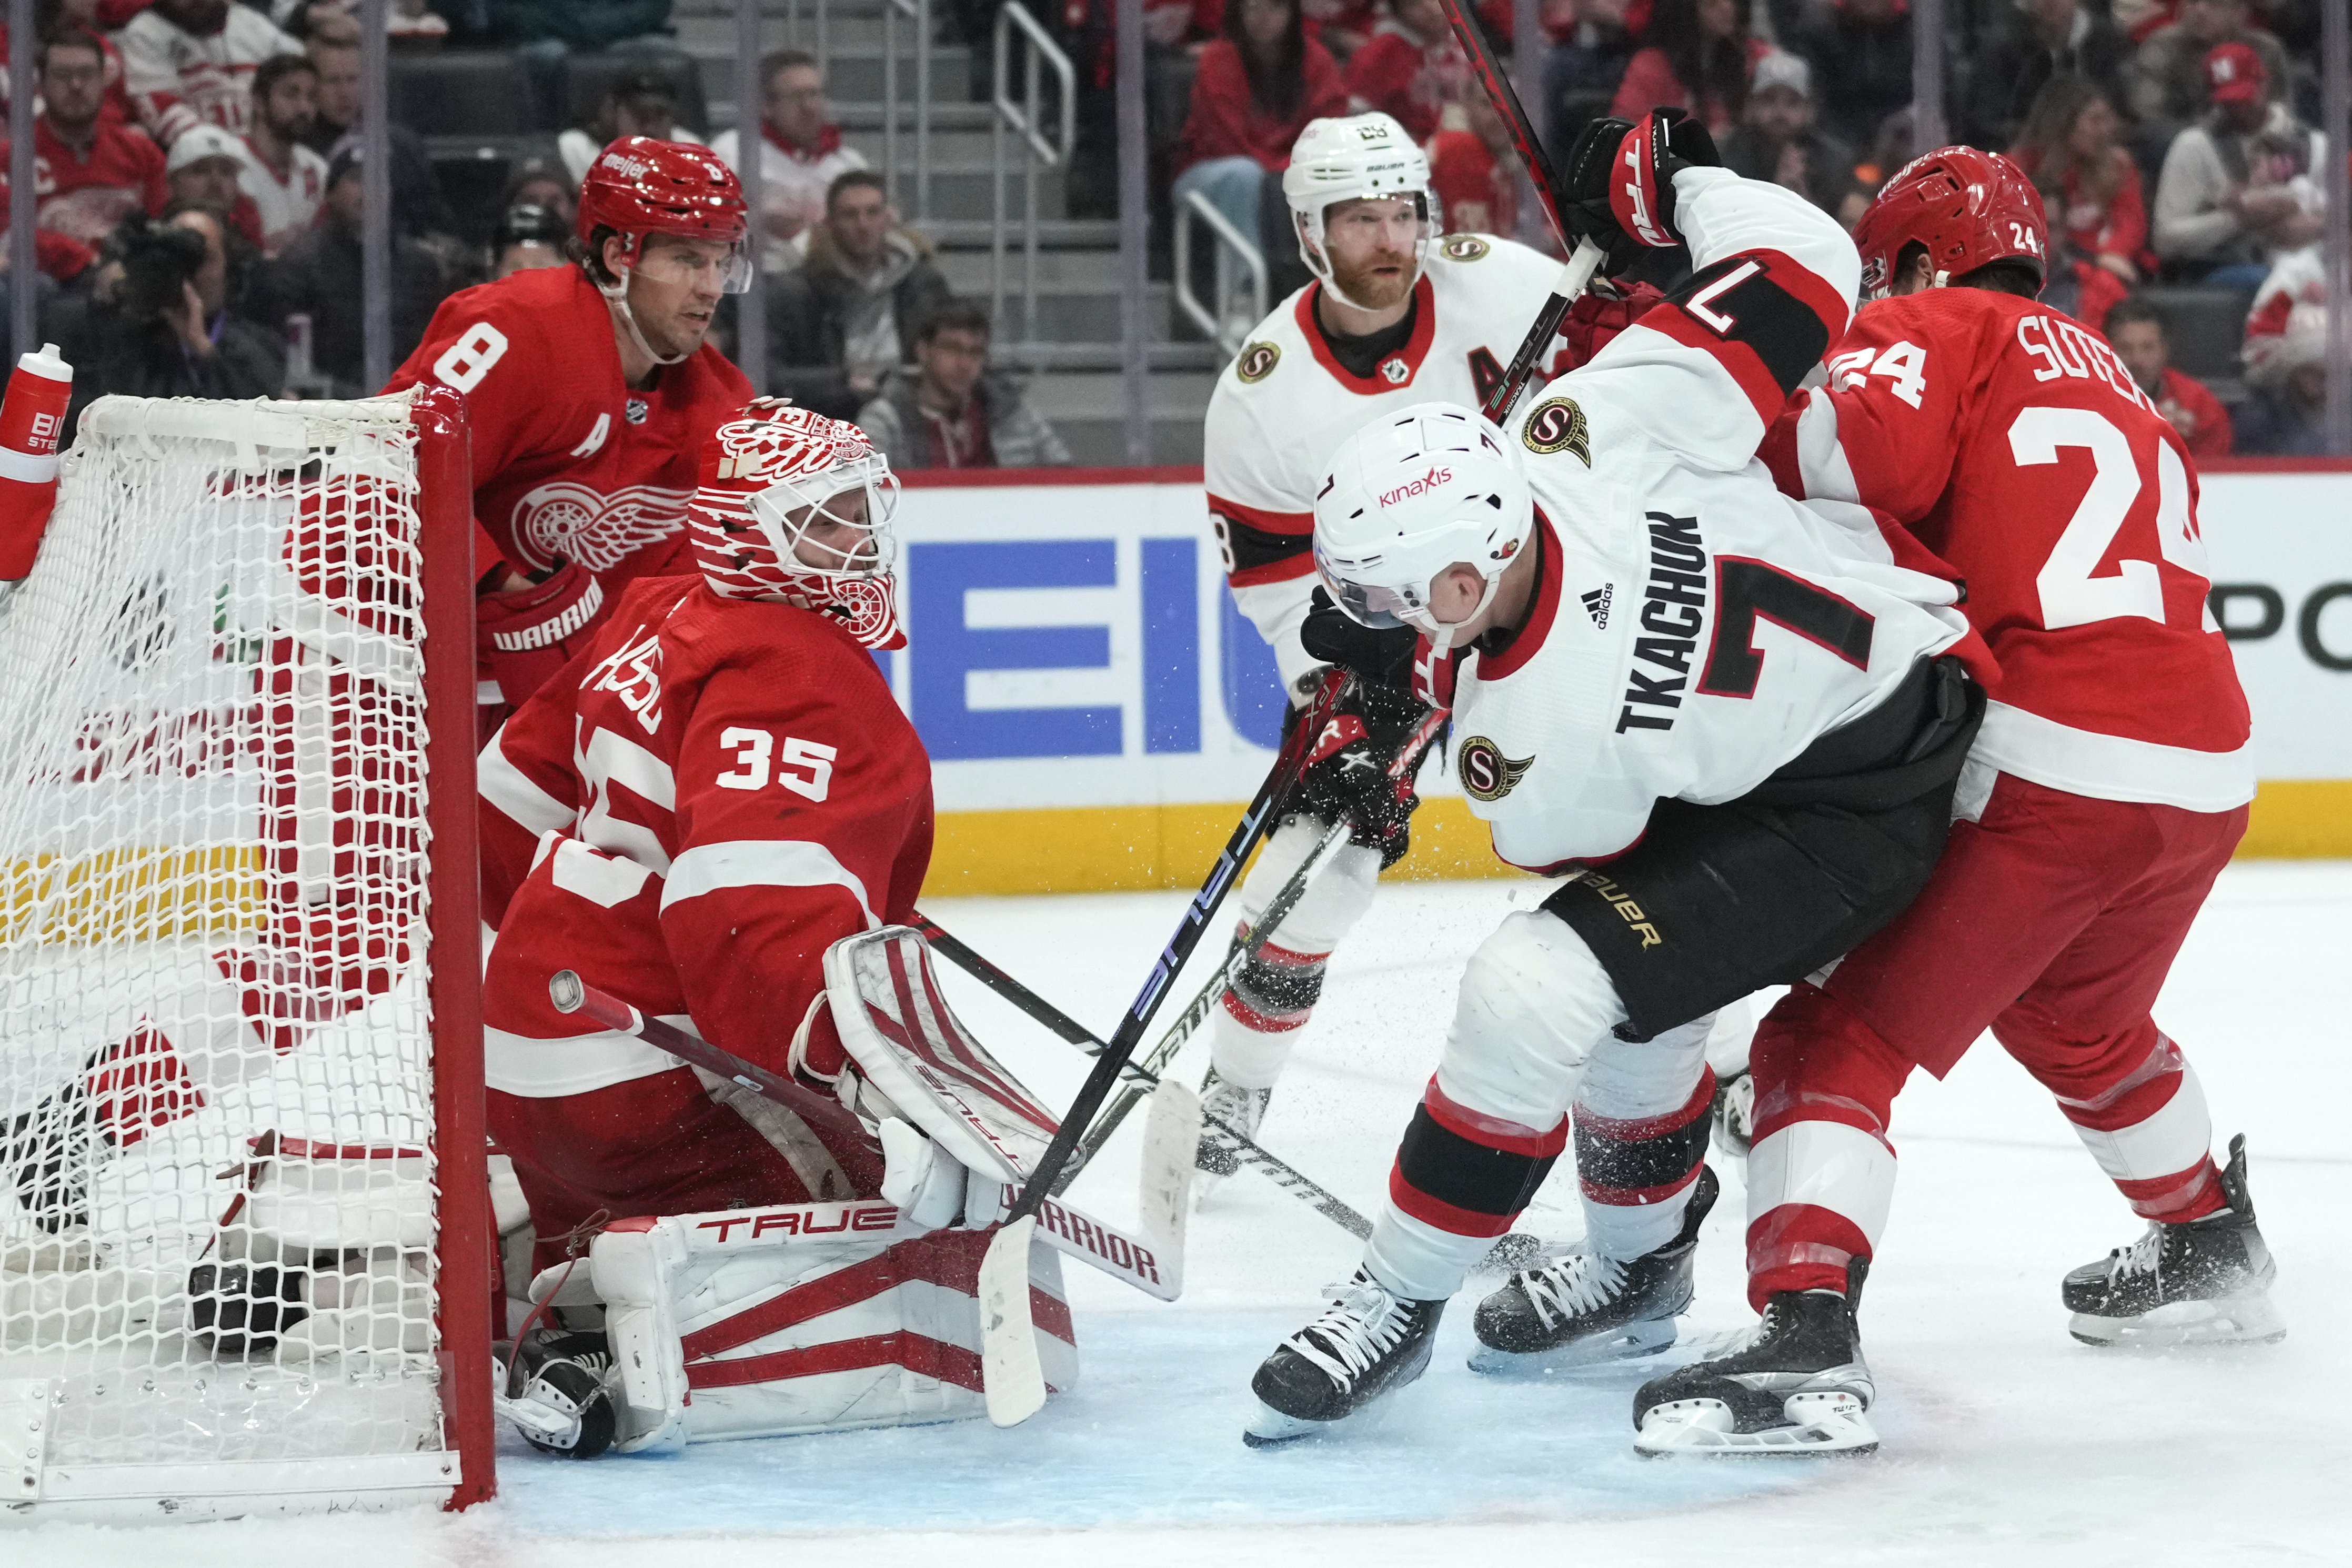 Larkin's shootout goal lifts Red Wings to 4th straight win – The Oakland  Press